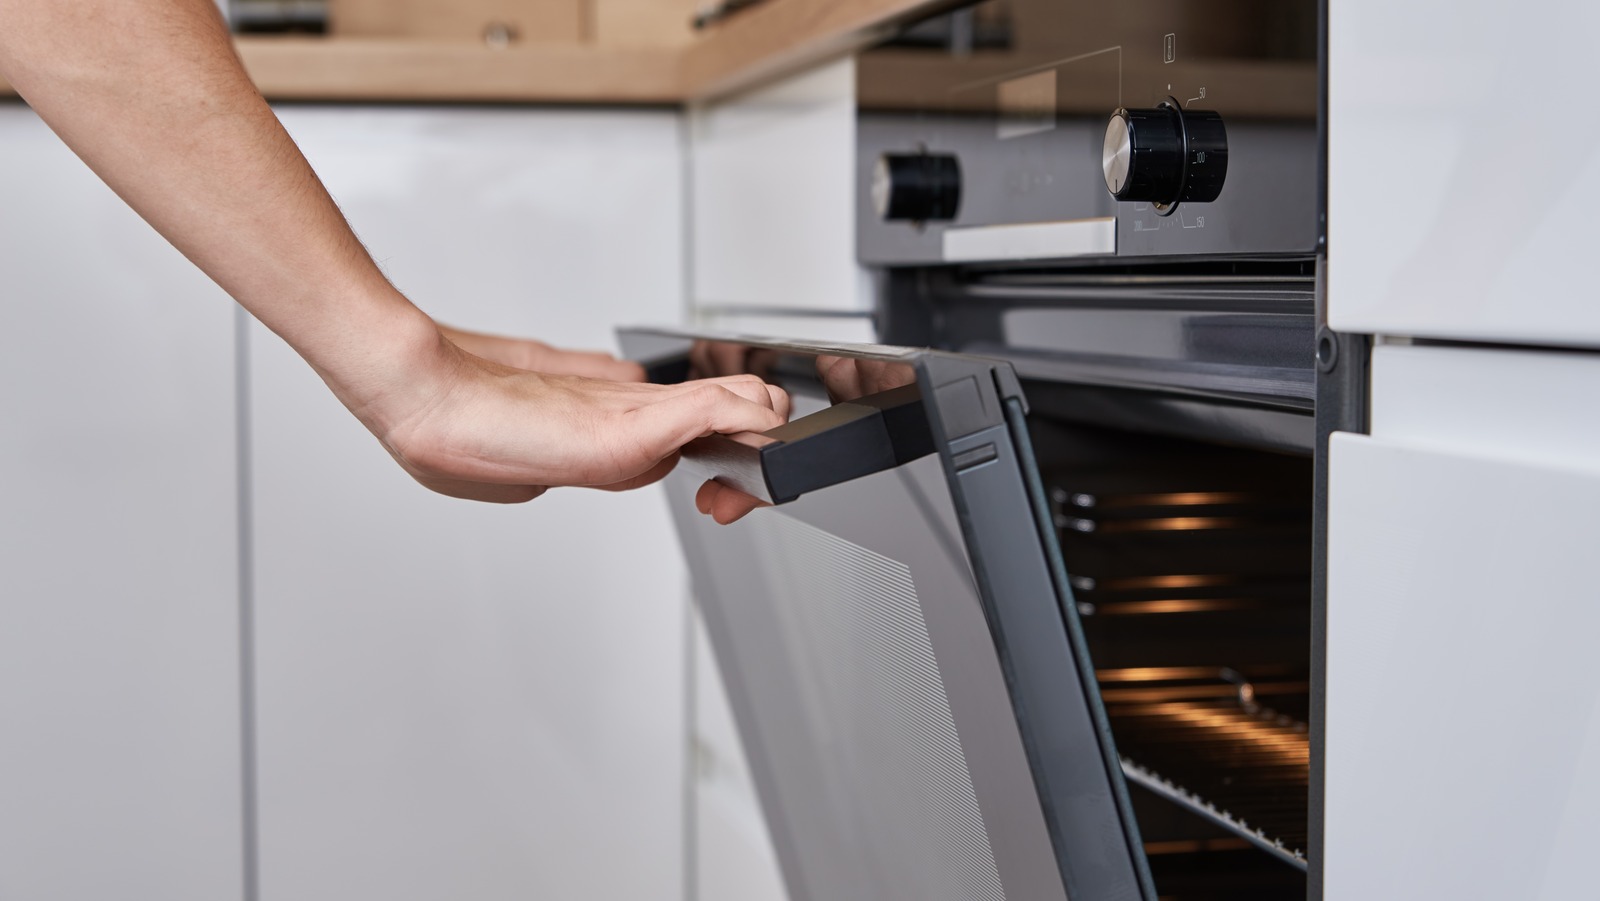 Oven Not Heating Up: Possible Causes and Fixes